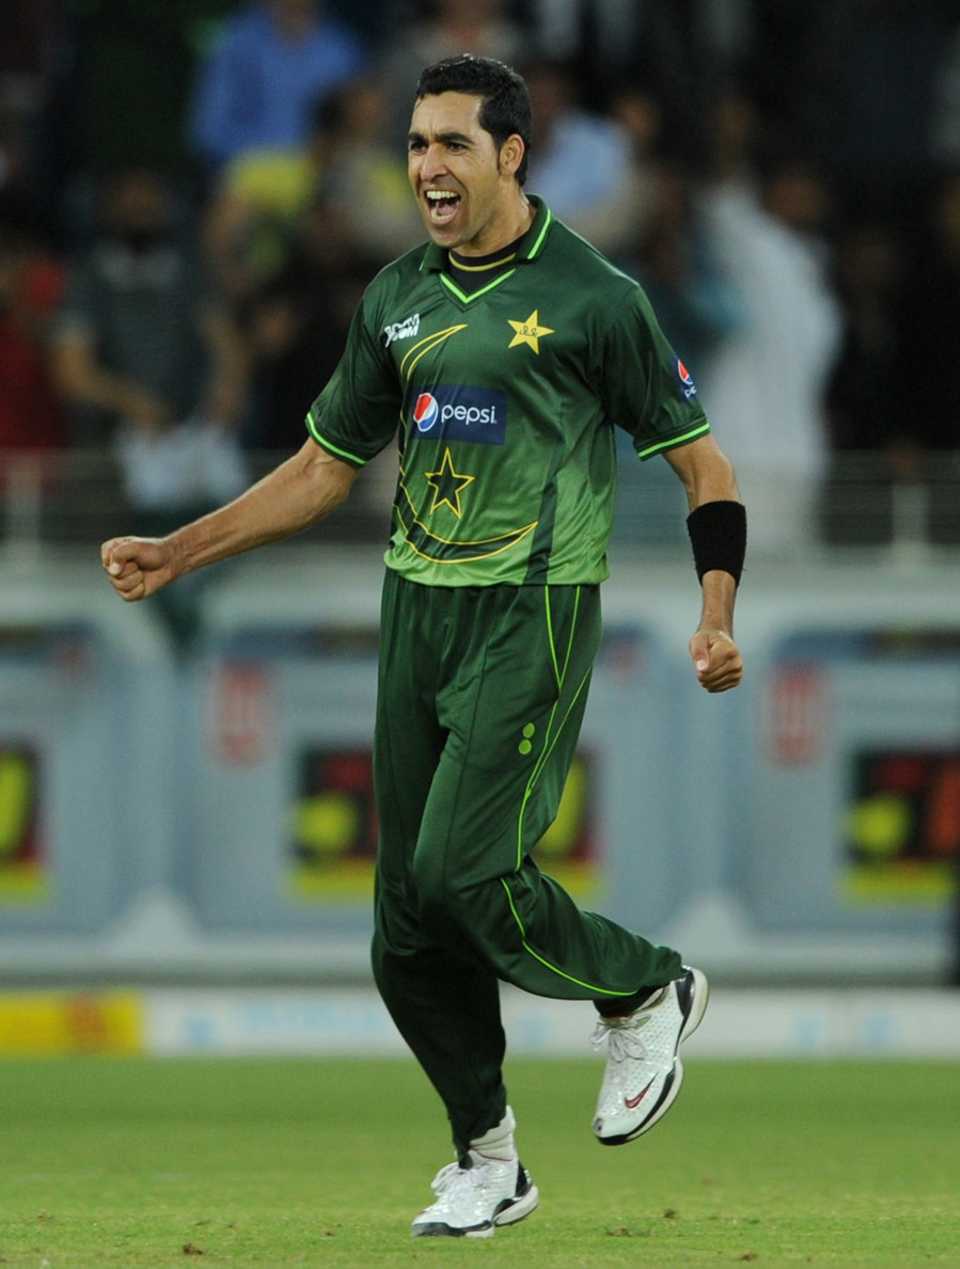 Umar Gul's 3 for 18 played a major part in Pakistan's victory